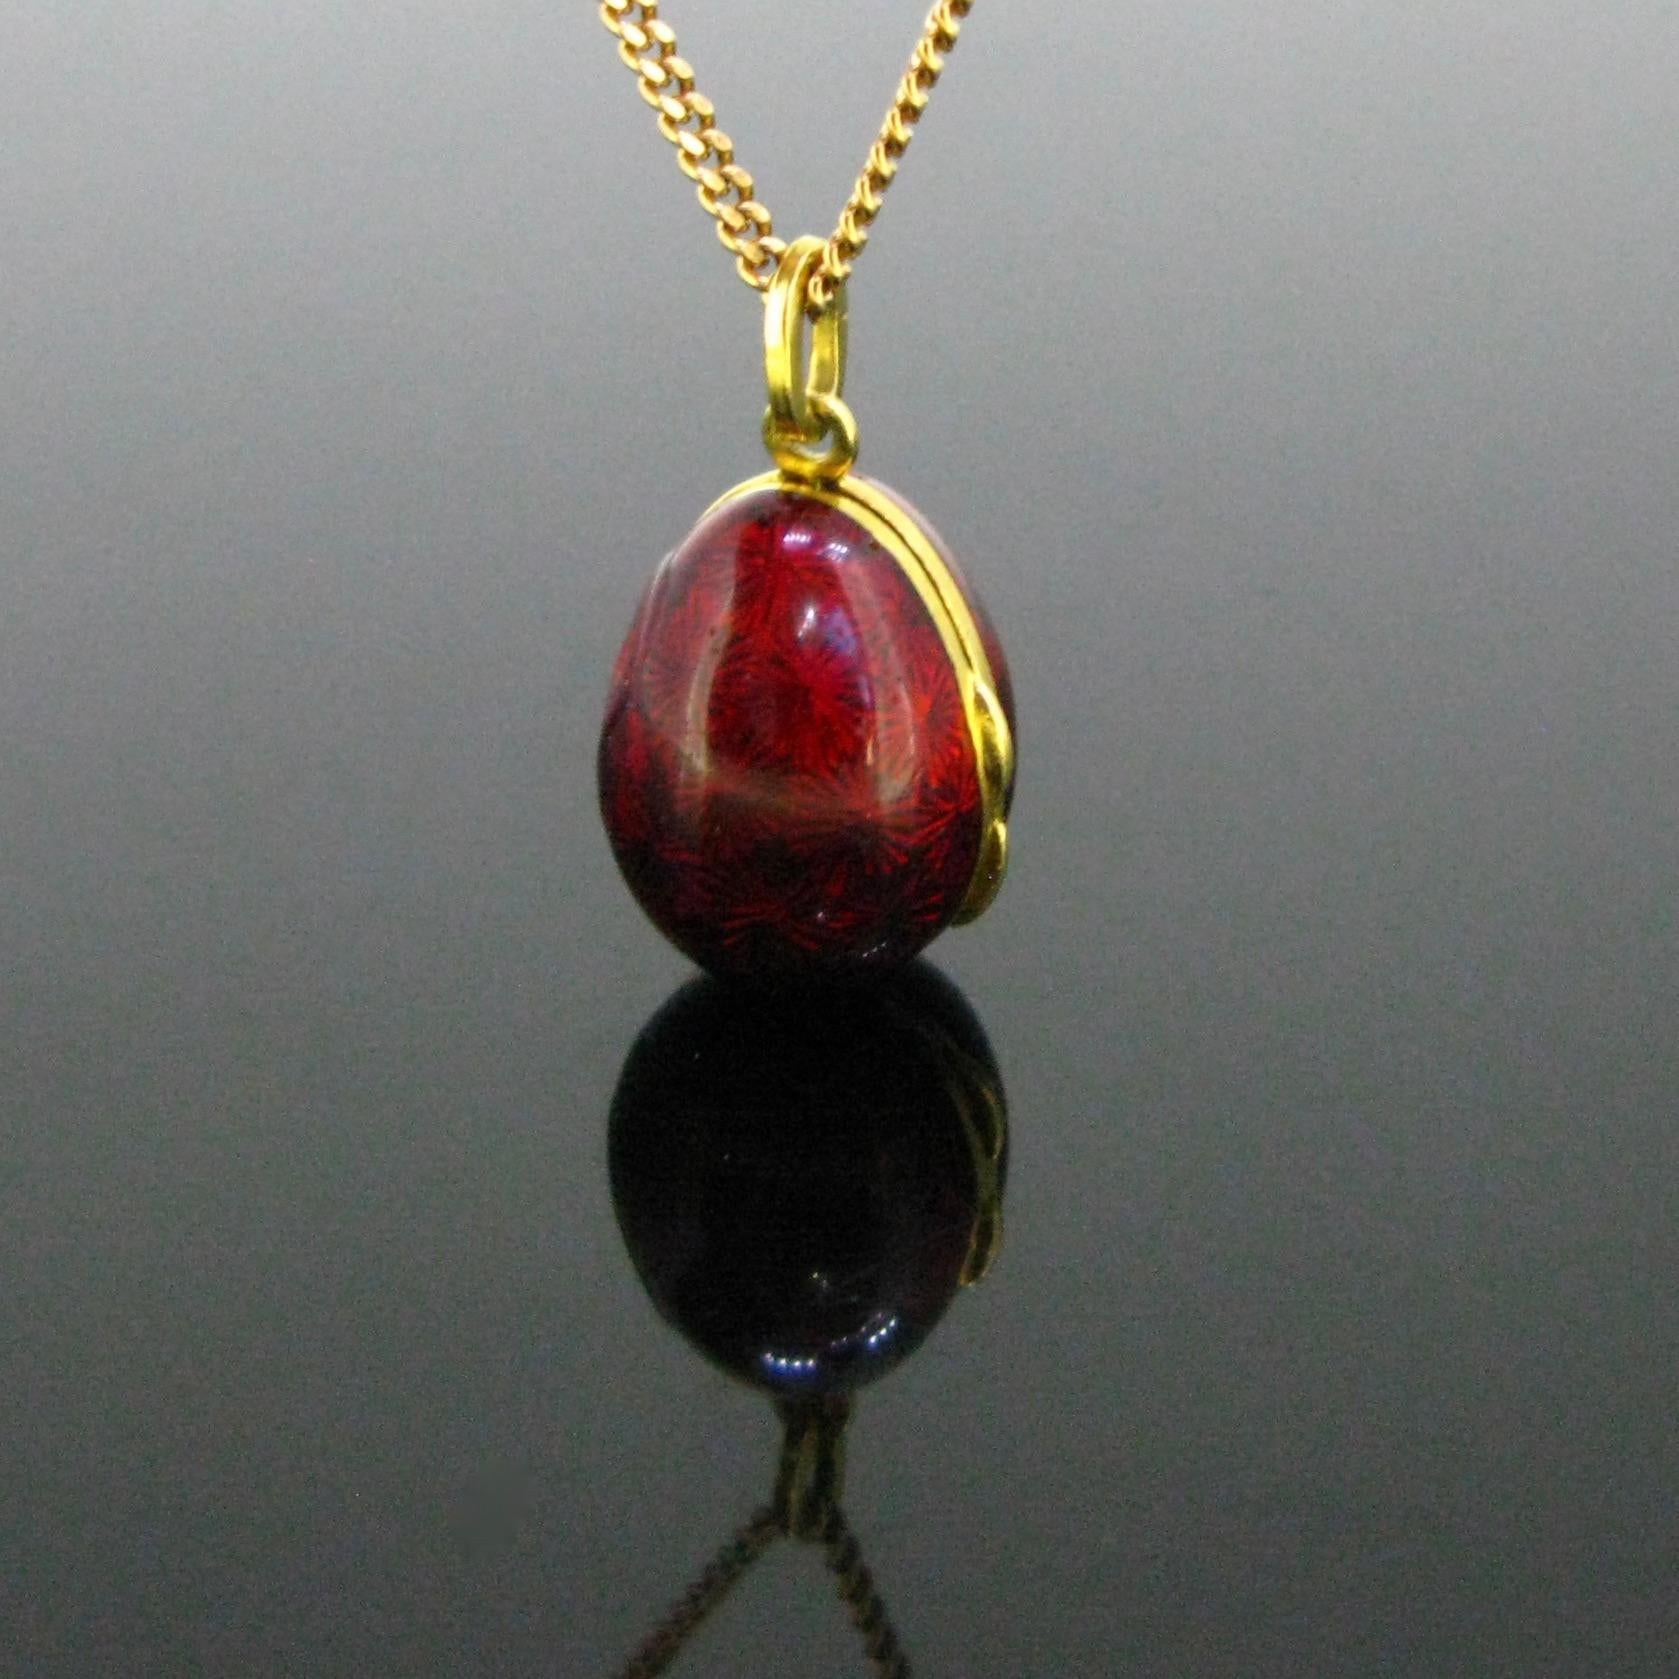 	
Weight: 8.27gr


Metal: 18kt yellow gold
Enamel


Signature: Cartier, Italy


Condition: Very Good (traces of wears)


Comments: This lovely locket pendant is inspired by the Fabergé egg. This one is made 18kt yellow gold and red enamel. This